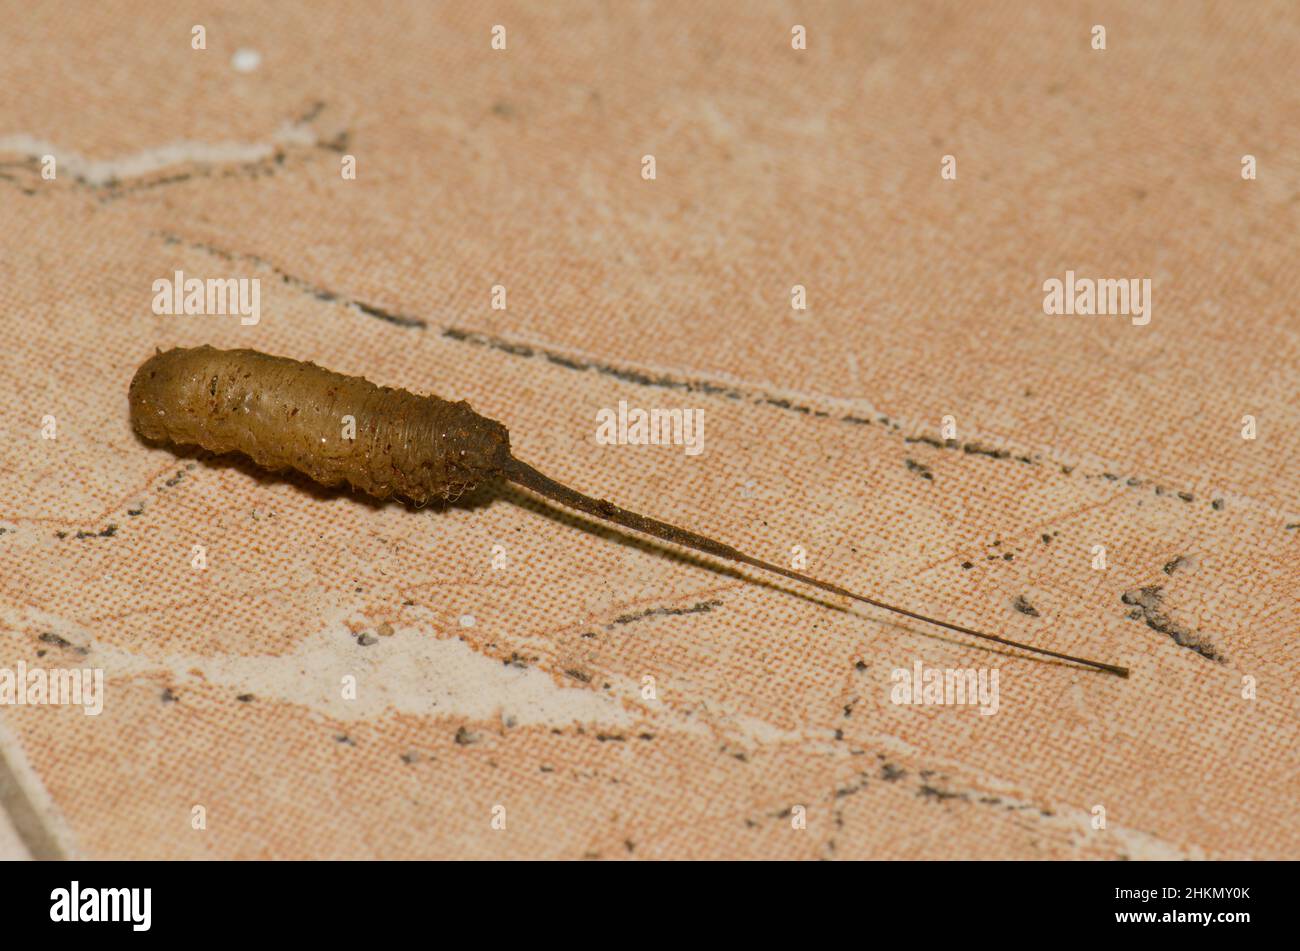 Rat-tailed maggot seeking a suitable place to pupate. Larval form of the common drone fly Eristalis tenax. Gran Canaria. Canary Islands. Spain. Stock Photo